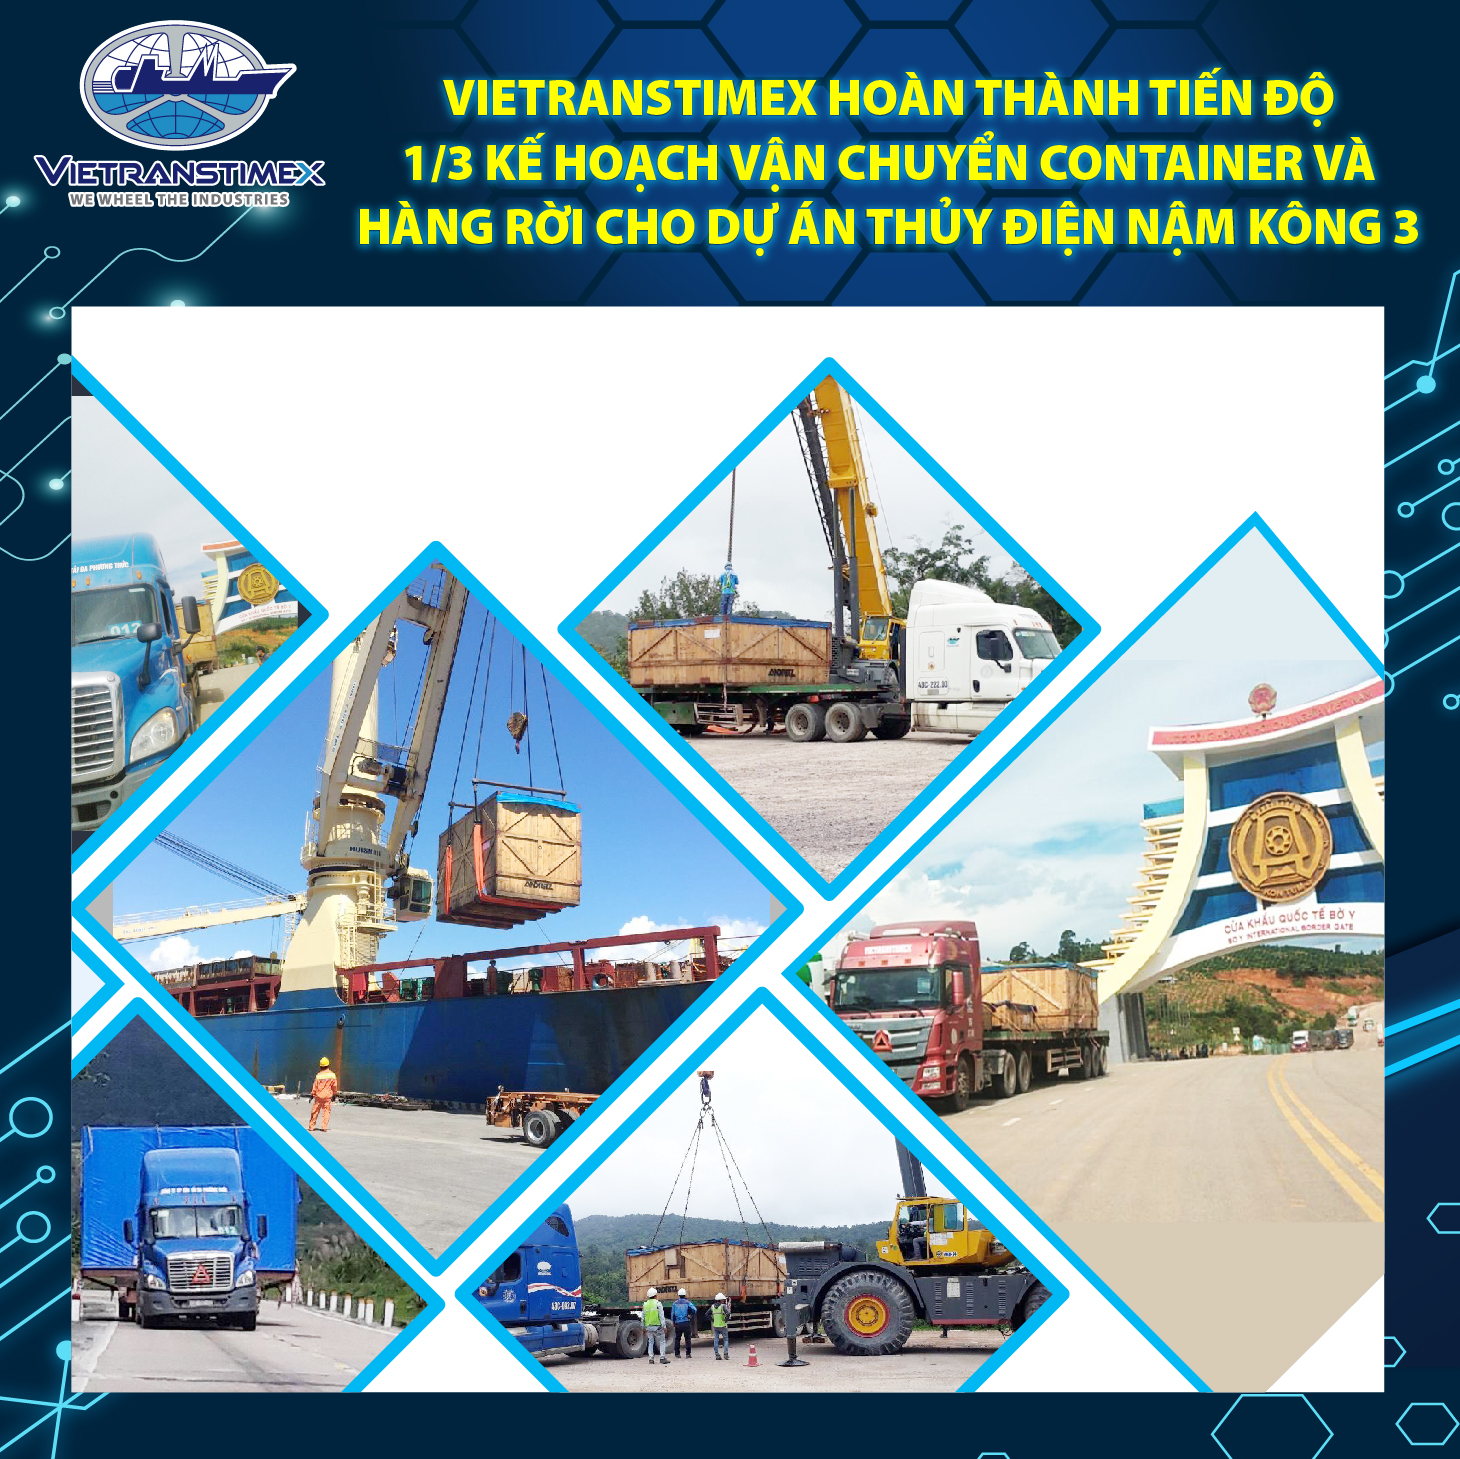 Vietranstimex Completed 1/3 Of Cargo Transportation Plan Of Nam Kong 3 Hydropower Project